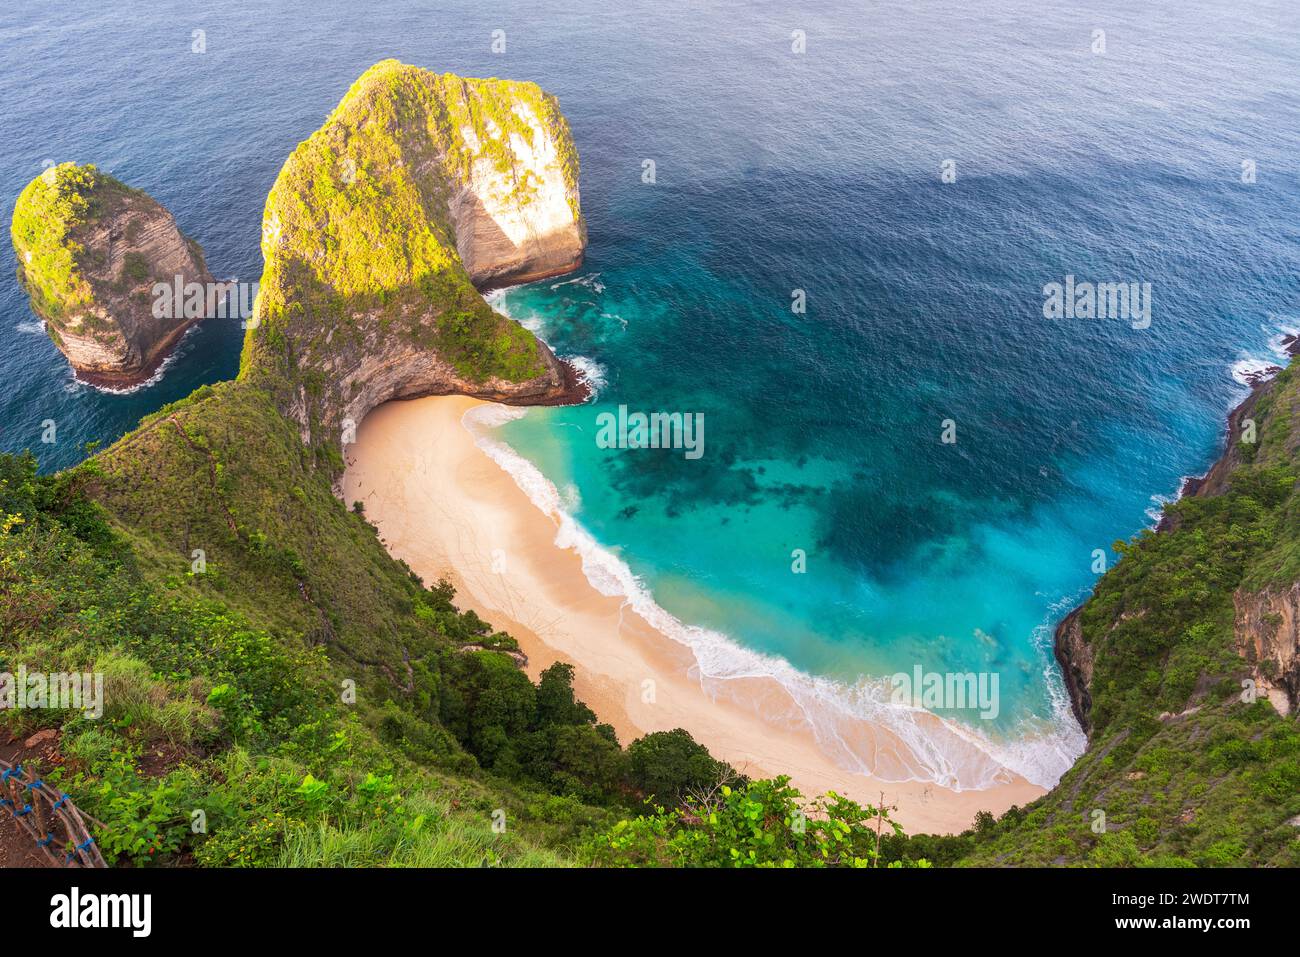 Kelingking white and sandy beach (T-Rex Beach) seen from above at sunrise, Nusa Penida island, Klungkung regency, Bali, Indonesia, Southeast Asia Stock Photo